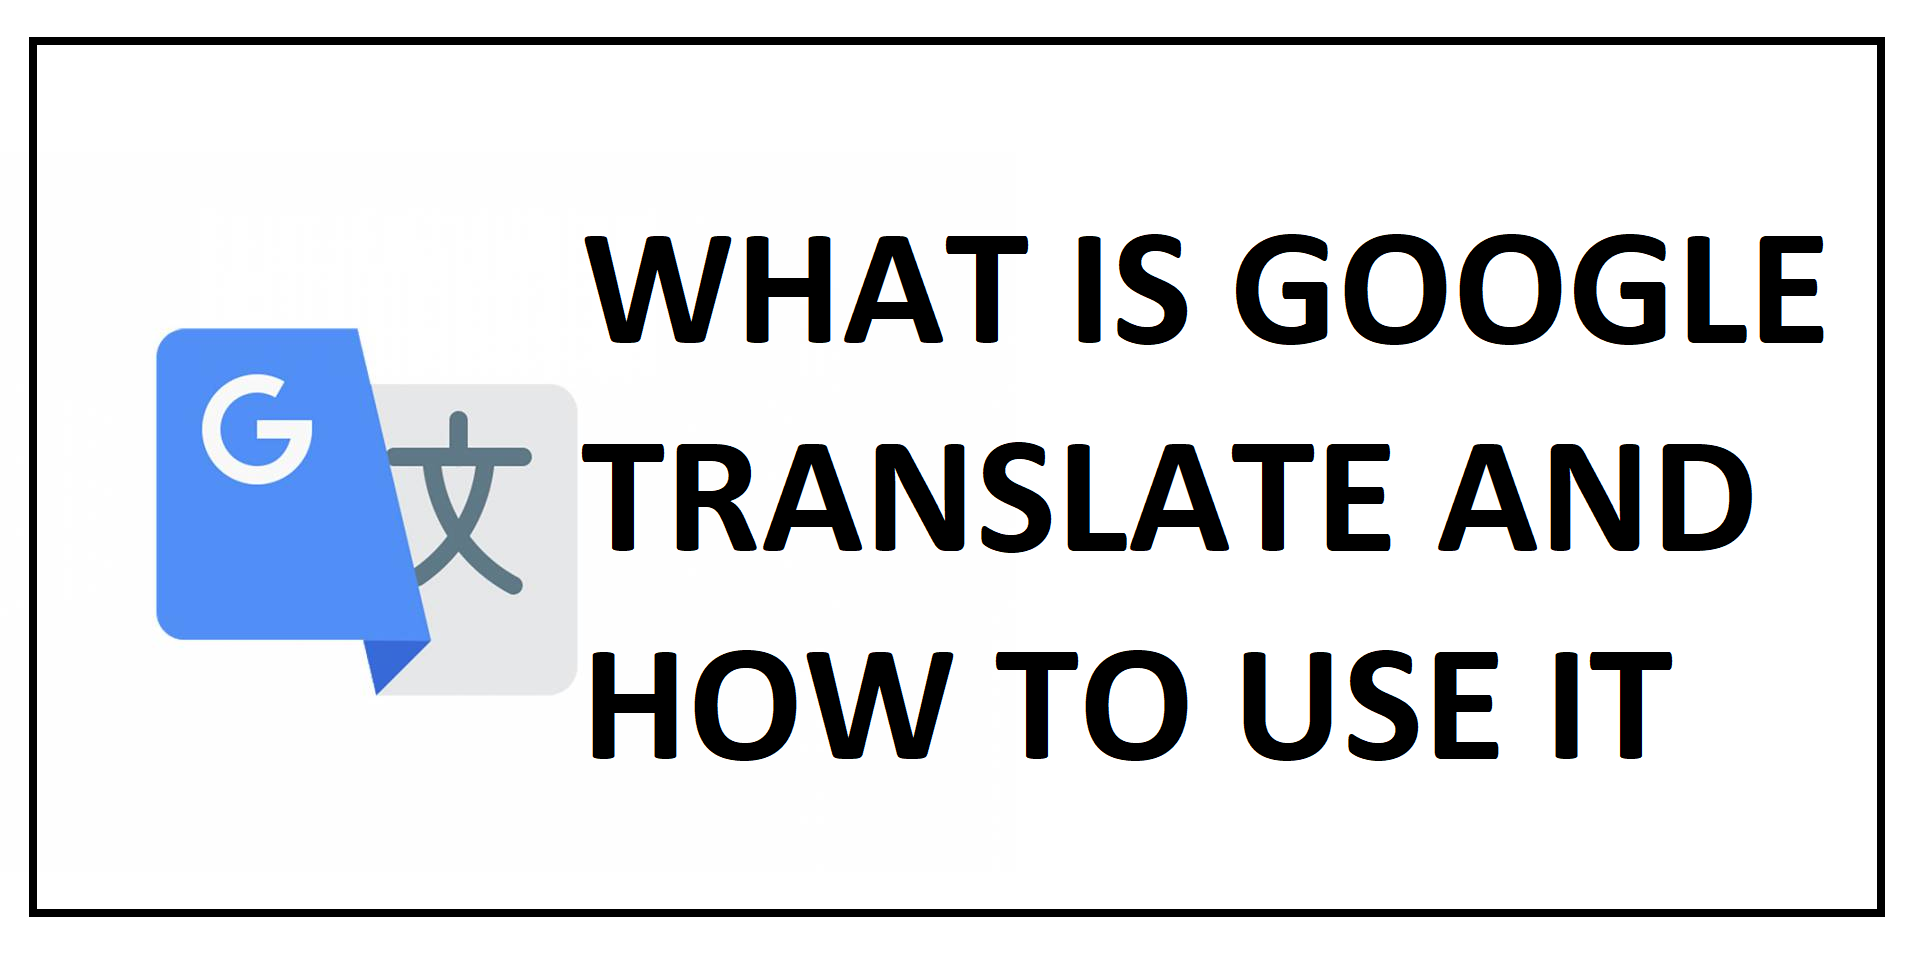 What is Google Translate and how to use it absolutely easily?